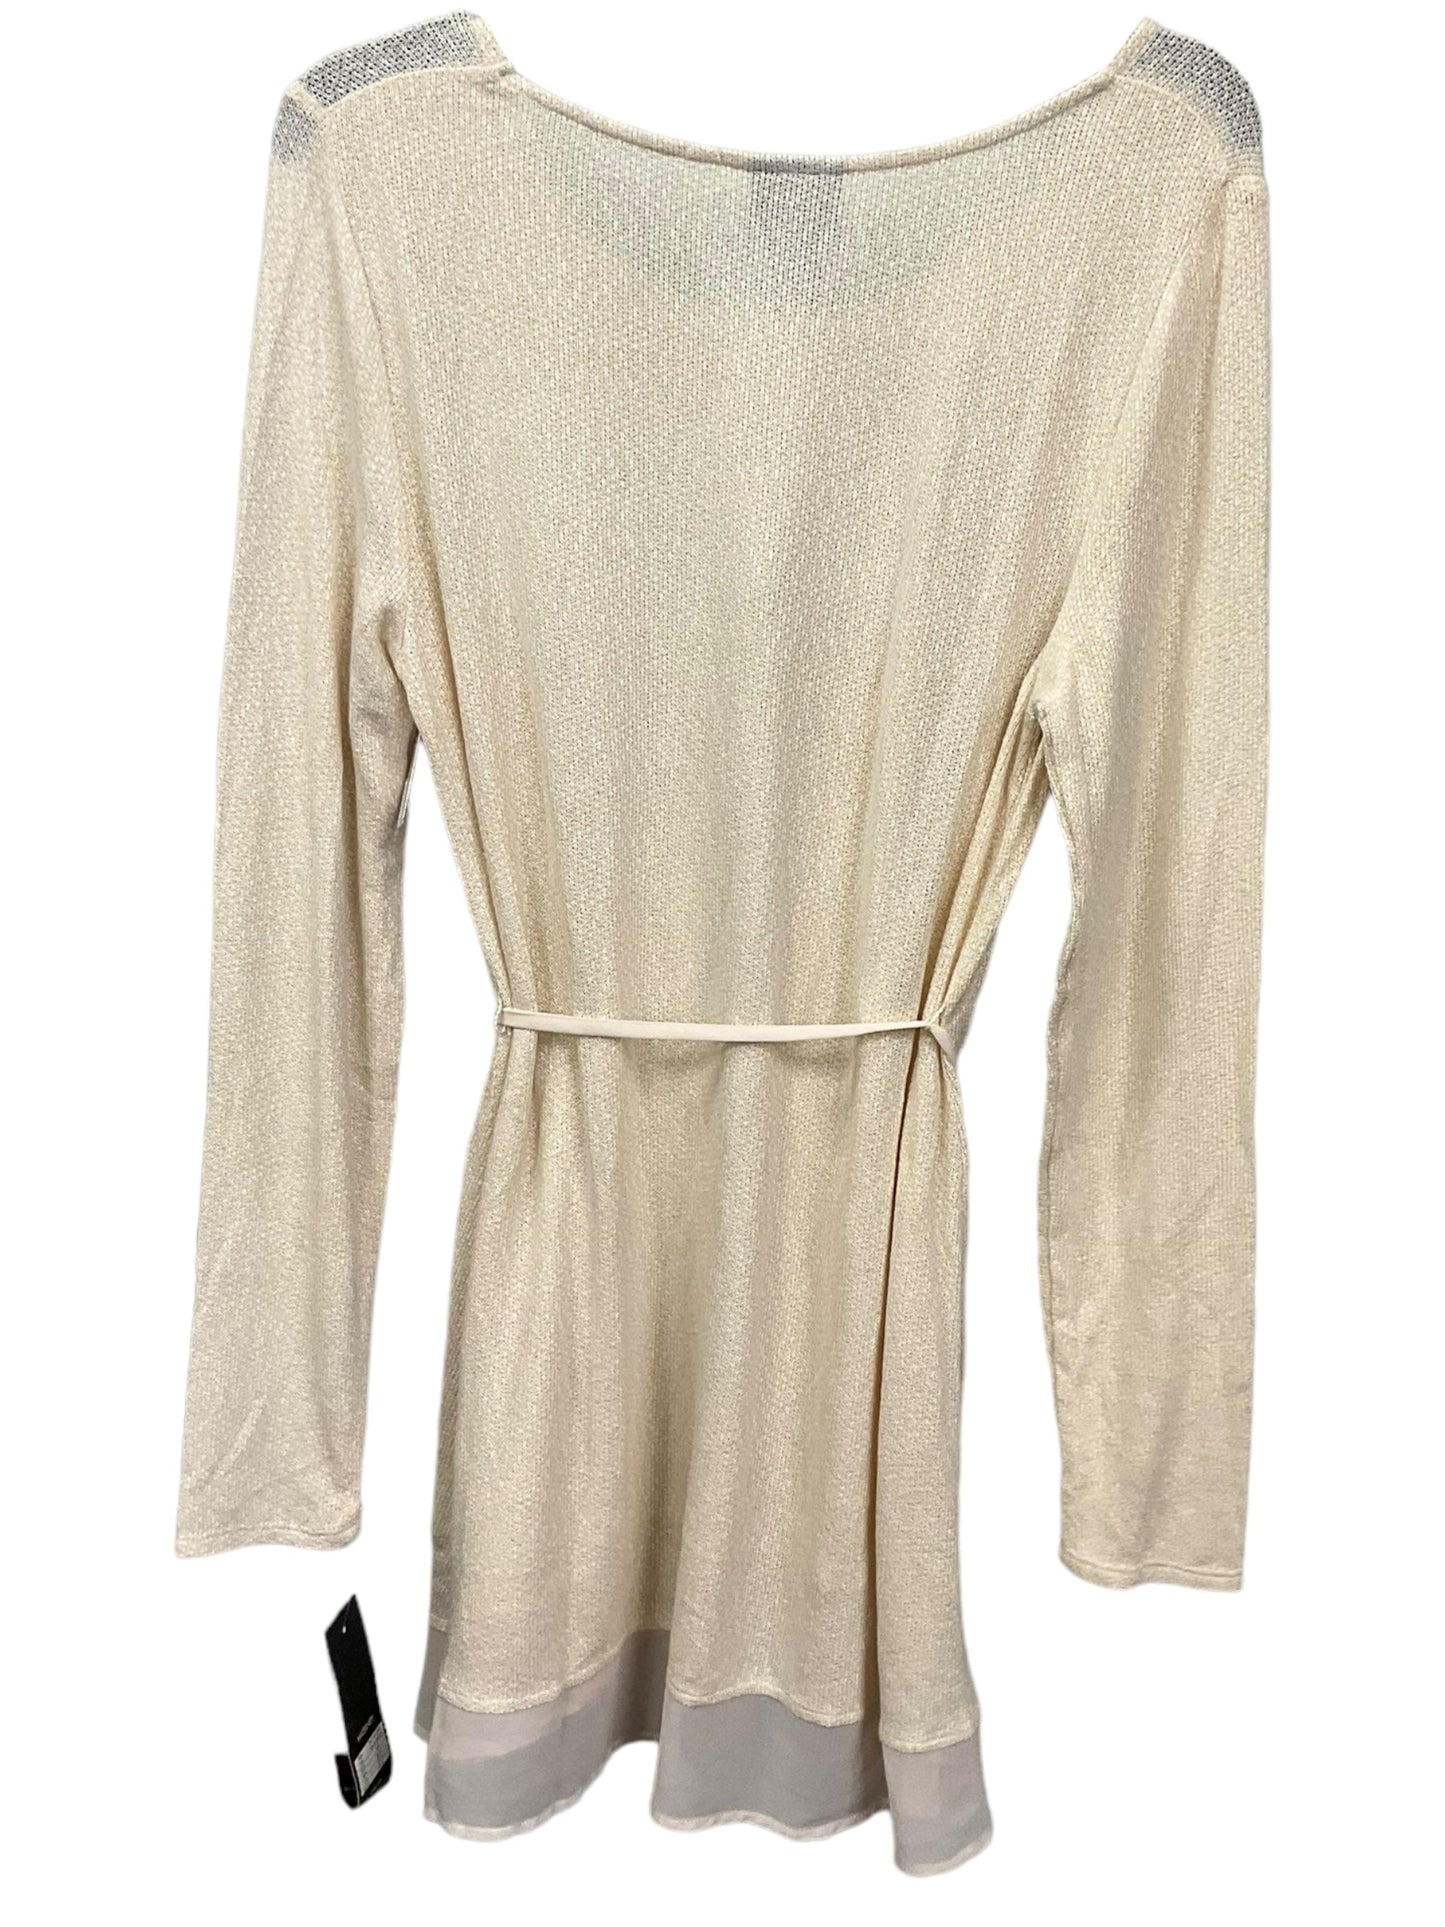 Cream Top Long Sleeve Oh Baby, Size L